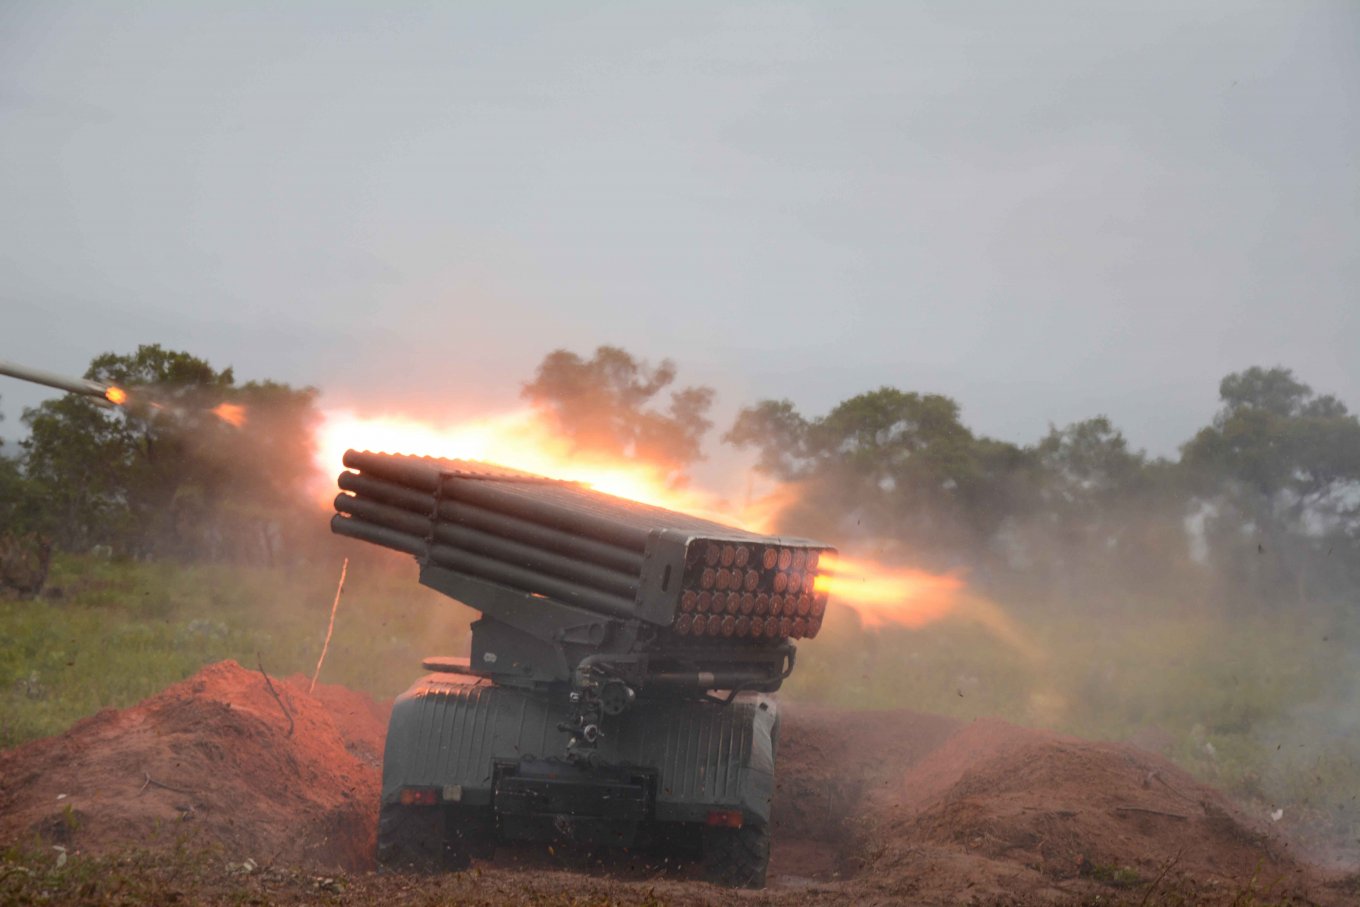 BM-21 Grad MLRS of the armed forces of Angola, Angola Wants to Be the US Ally, Its Excess Soviet Weapons Can Help the Armed Forces of Ukraine, Defense Express